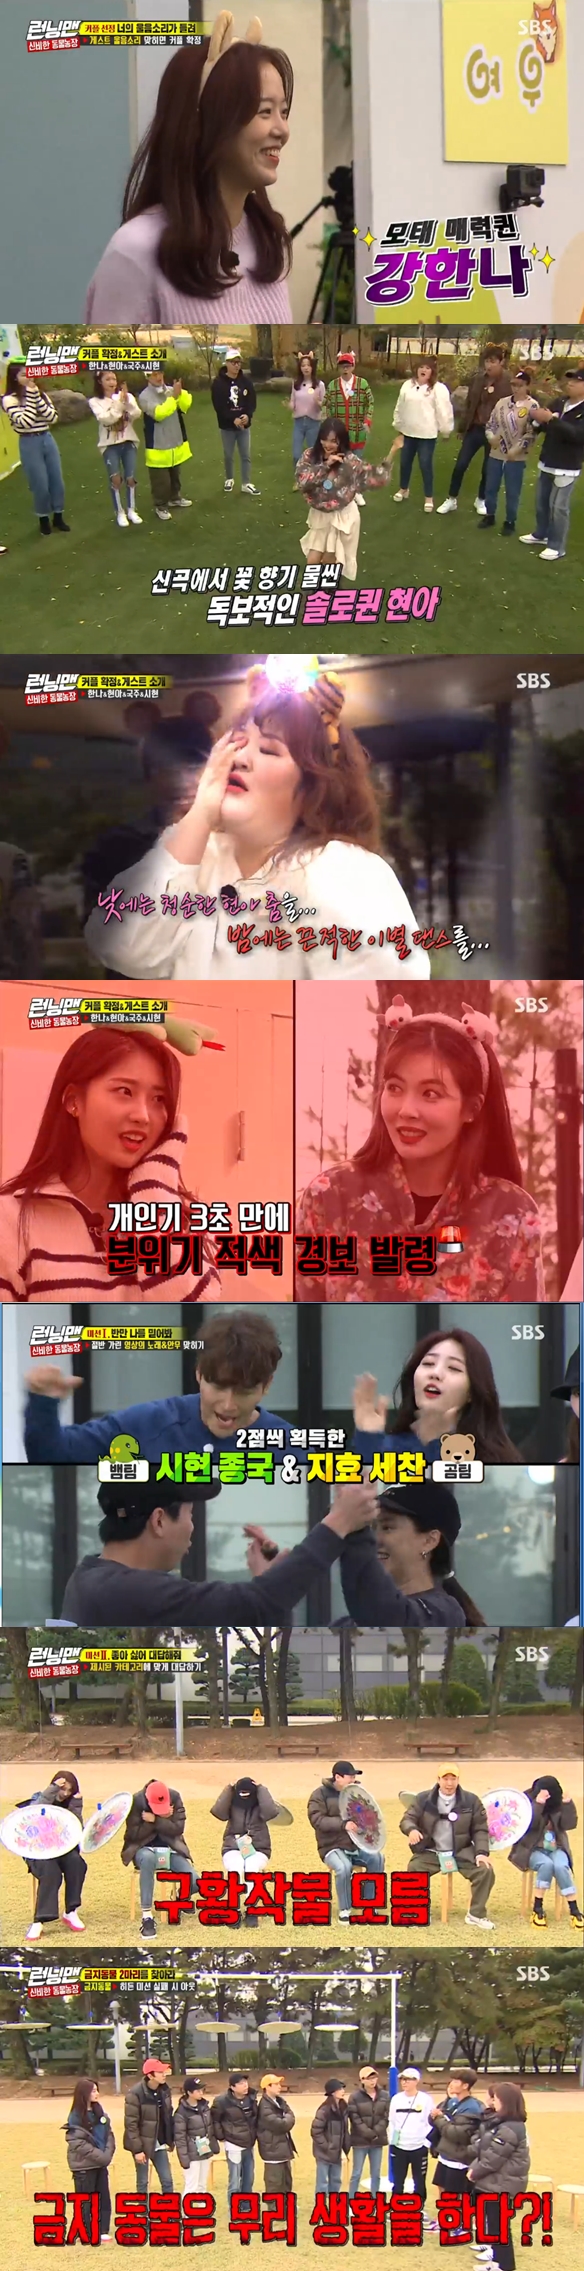 They didnt get a hint.In the SBS entertainment program Running Man broadcasted on the afternoon of the 10th, Kang Han-Na, Lee Guk-joo, Hyona, and Evergloos Shihyun came out as guests and paired with members to race with members.The members gathered at the opening saw the set waiting for the guest and started a full recording.Expecting a male guest to come out, Jeon So-min teased Yang Se-chans pants when he saw them, Why did you come overboard?So Song Ji-hyo said to Jeon So-min in a LA Lakers sweater, Why did you wear clothes overturned? Is not it a couple of times with Sechan?Yoo Jae-Suk has revealed a story that would be suspicious between the two.Jeon So-min told Yang Se-chan, who did not worship, Yesterday I was pretty, he laughed.While the members laughed and talked, the crew informed the members that it was time to release the guest.The crew asked Song Ji-hyo and Jeon So-min to go behind the set with a guest.So, Jeon So-min showed his desire for a man guest, saying, Why do not we always care?Jeon So-min, who was grumbling into the set where the guest was waiting, gave Yang Se-chan a signal and laughed.The male members noticed half the identity of the guests who hid their identity with only a few questions.Especially in the Jeon So-min turn, she acted and changed her voice, but the members were able to understand at once and embarrassed her.Lee Guk-joo also asked Yang Se-chan, You are working with me.Song Ji-hyo was a member who found out the identity, but still did not find out the identity of the three guests.The guest, whose male members did not notice the identity, was the Xi-hyun of Hyuna and Everglow; Hyuna stunned the members by disassembling them into pigs and performing a perfect vocalization.Hyuna hurt him by being candid about not wanting to be paired with Lee Kwang-soo; she paired her voice with Yoo Jae-Suk.The pair of the snake-split Sihyeon was determined to be Kim Jong-kook.Song Ji-hyo was paired with Yang Se-chan, Jeon So-min with Haha, Kang Han-Na with Ji Suk-jin and Lee Guk-joo with Lee Kwang-soo.Kang Han-Na, who visited Running Man in a year, told the latest: I was lying down every day and resting, she said, when asked by Yoo Jae-Suk if she was busy.Kang Han-Na said, I also experienced the pain of separation.As the atmosphere grew darker, Kang Han-Na said, I have been over it for a while, but Yoo Jae-Suk asked the members about the overcoming cases of separation, saying, Lets help Hannah overcome because she is a family.What song is good to overcome separation? asked Yoo Jae-Suk to Kim Jong-kook, who was the first runner.What song is it? said Kim Jong-kook, exercise is the best for separation. He actually said he climbed the apartment stairs after parting, and all tongues out.Hyona showed off the stage of Flower shower, a song that came back for a long time, in front of the members.After the stage of Hyuna, Yoo Jae-Suk asked Lee Guk-joo to dance, saying, Did not you completely digest the stage of Hyuna from Red Yo?Lee Guk-joo showed the stage that did not disappoint again this time, and led the members to applaud.Shihyun, a new seven-month debut, showed his unfailing appearance in front of the entertainment betarangs, making the members happy.She said she prepared her personal life and said she would show her how to solve her throat with the siren sound, but in three seconds of her personal life, the members were embarrassed by the cheap atmosphere.Hyuna looked at Shihyun with a smile and said, I practiced my personal life really hard when I was a rookie.Although he failed in his personal life, Everglows new song stage was perfectly presented and sighed.After the opening, a full-scale race was held. The crew ordered members to find banned animals in the animal farm.Two banned animal members had to perform the Hidden mission for each round, and if the banned animal member who failed the Hidden mission was automatically eliminated.The first mission result was the team that received hints about banned animals, Kim Jong-kook, Shihyun team and Song Ji-hyo Yang Se-chan team.Kim Jong-kook, who received the hint, looked confident, saying, Its getting clear now. In the second mission, it was a group mission.If successful in the group mission, all 12 people were given hints about banned animals.On the second mission, members with pure brains were able to play a big role: answering the question, Okay, no.Ten chances were given but failed to cross the minefield Yang Se-chan and Song Ji-hyo and failed the mission.For members who did not get the mission, Kim Jong-kook shared a hint that forbidden animals live in groups.